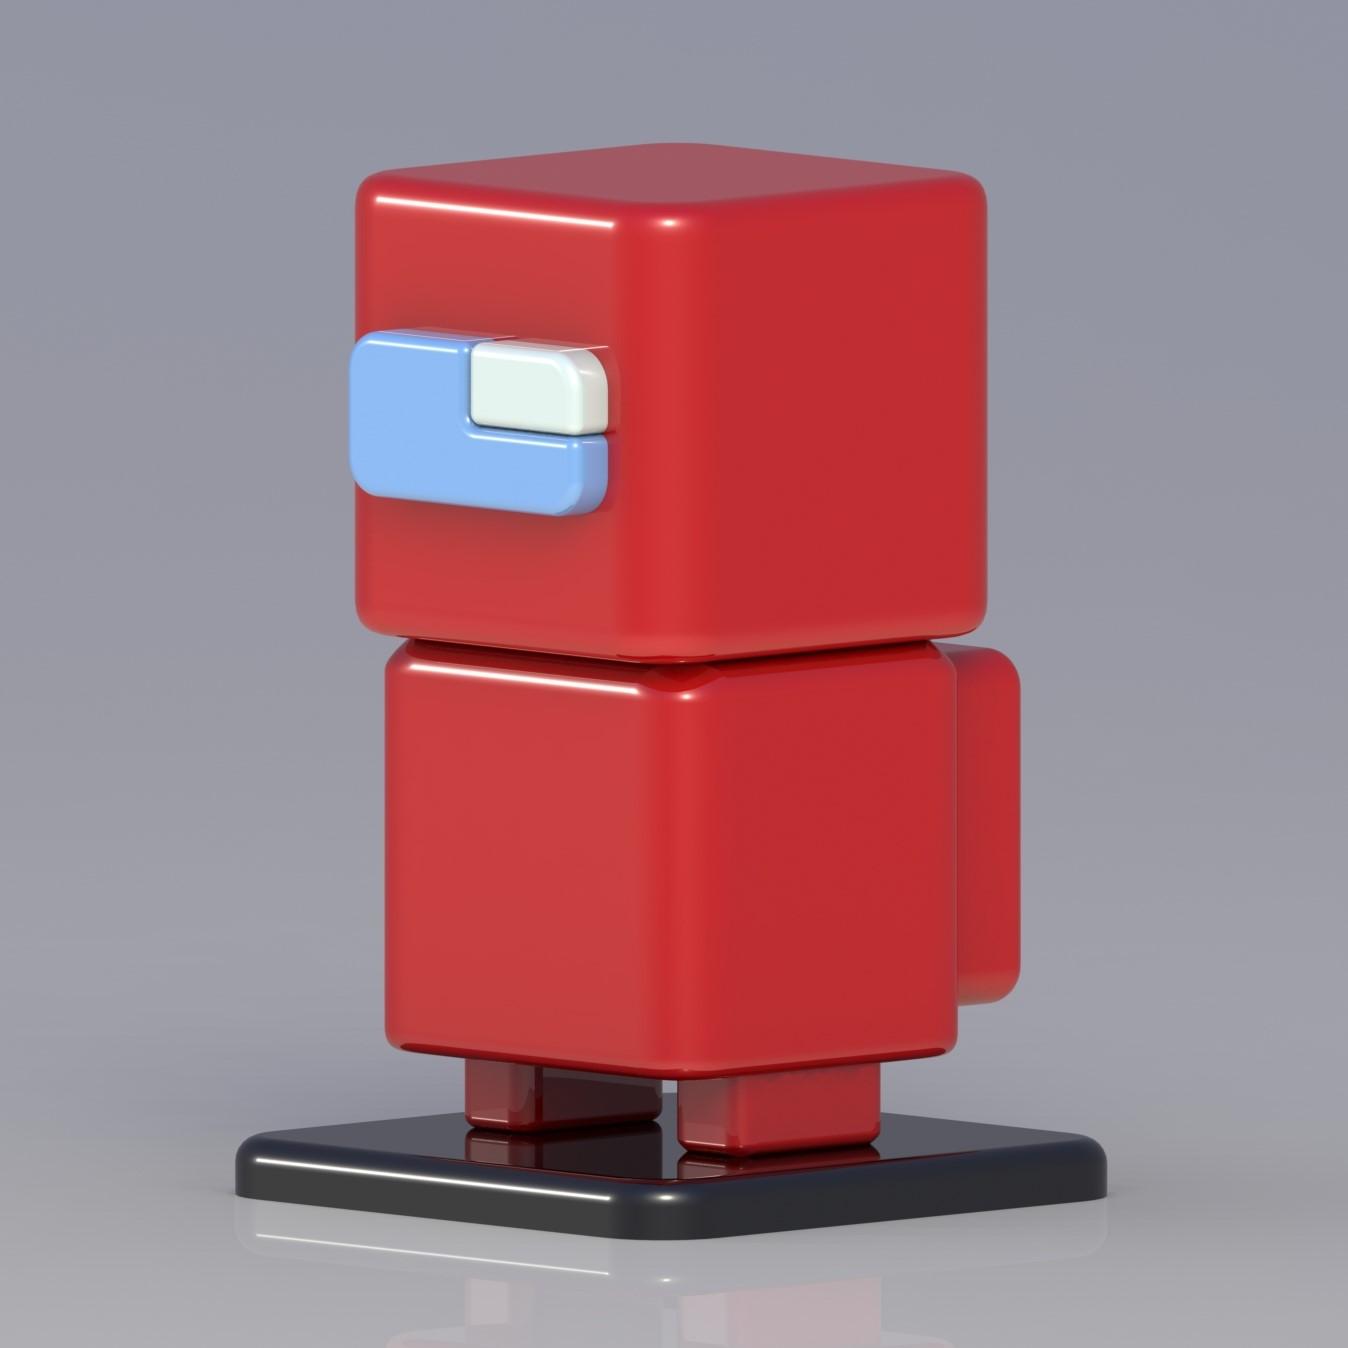 SQUARED AMONG US CHARACTER 3d model